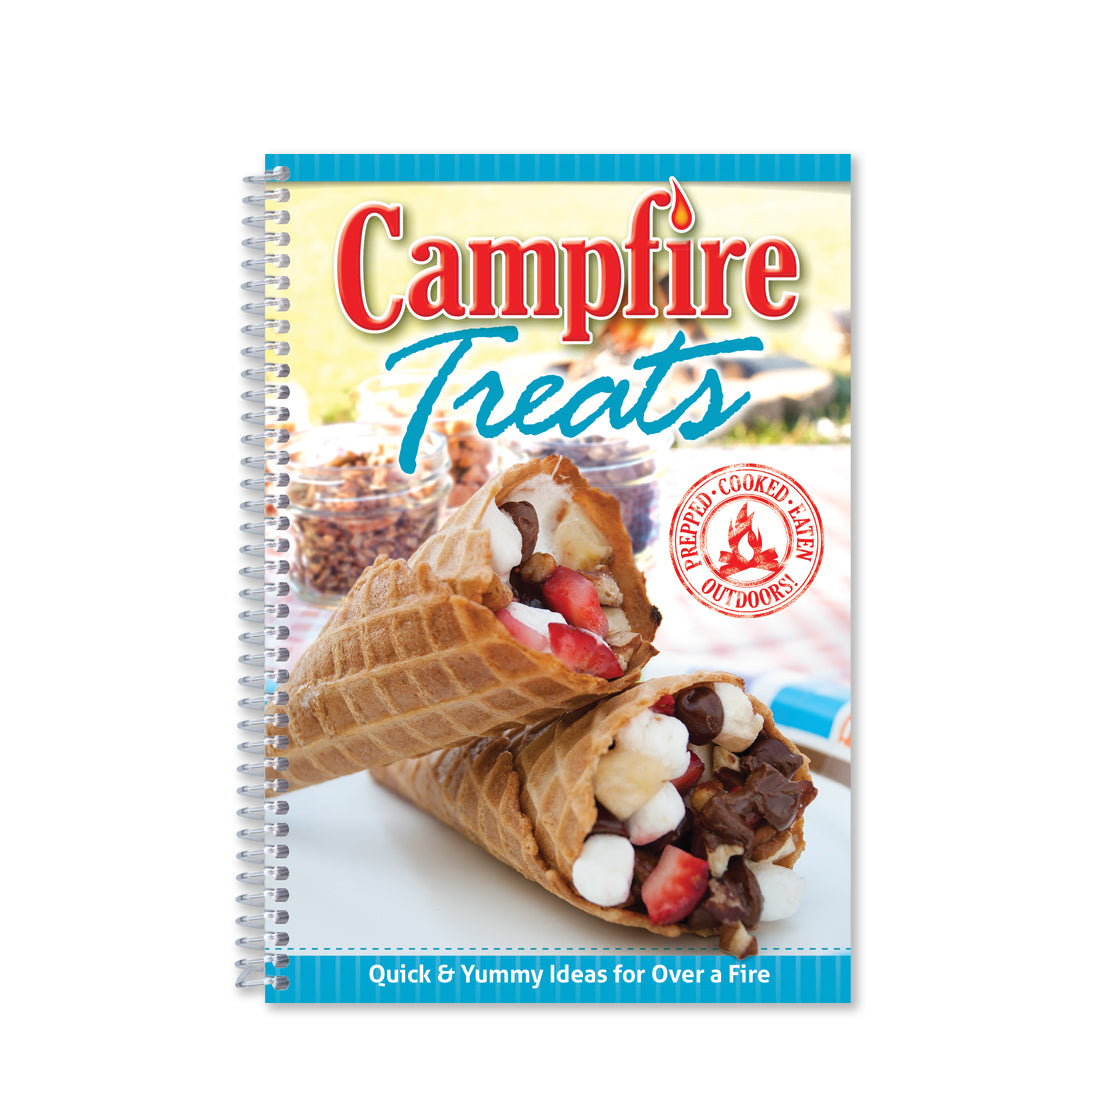 campfire treats, quick and yummy ideas for over a fire, camping dessert ideas, marshmallow, strawberries, chocolate, fireside treats, sweet treats, easy desserts